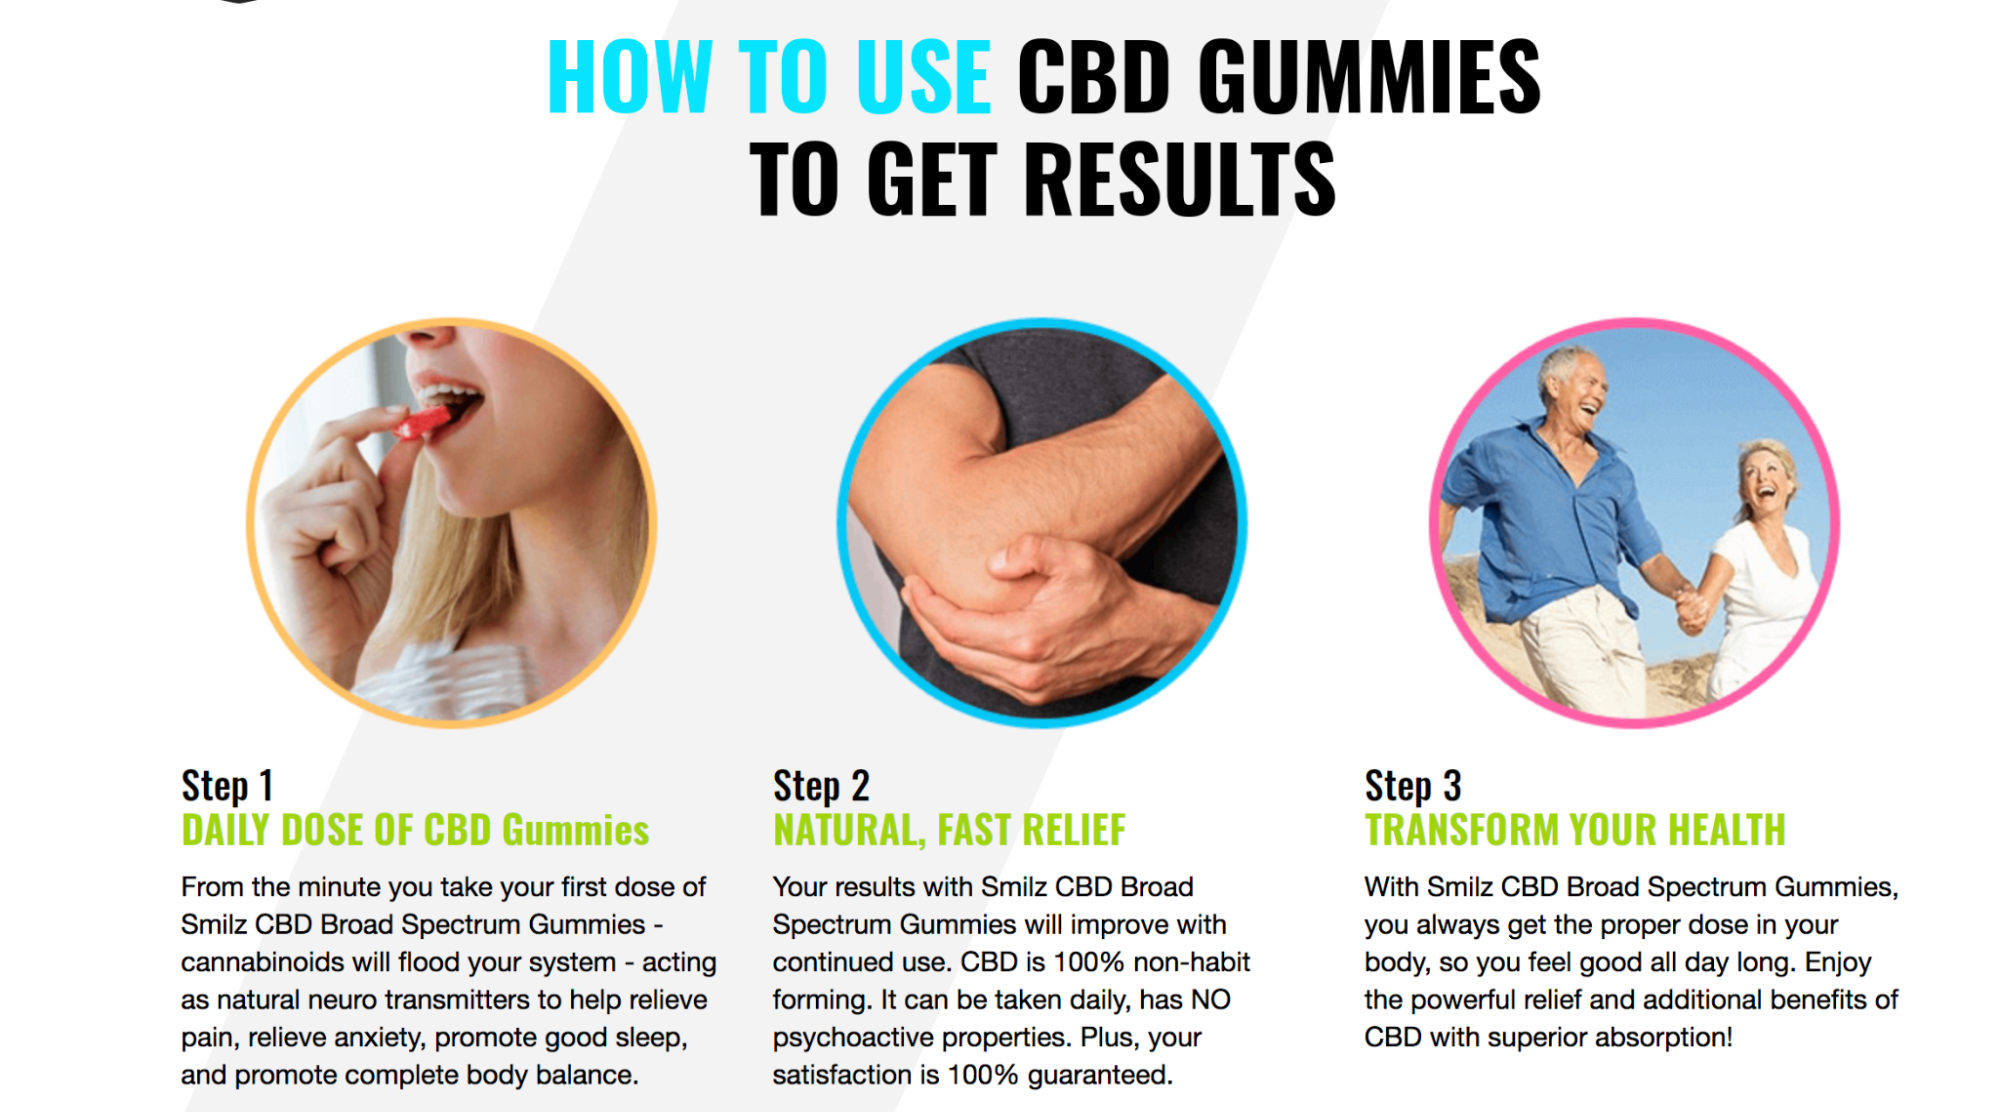 Charles Stanley CBD Gummies CBD Gummies Tinnitus Reviews Risky Side Effects  or Benefits? Must Read! | Paid Content | Cleveland | Cleveland Scene